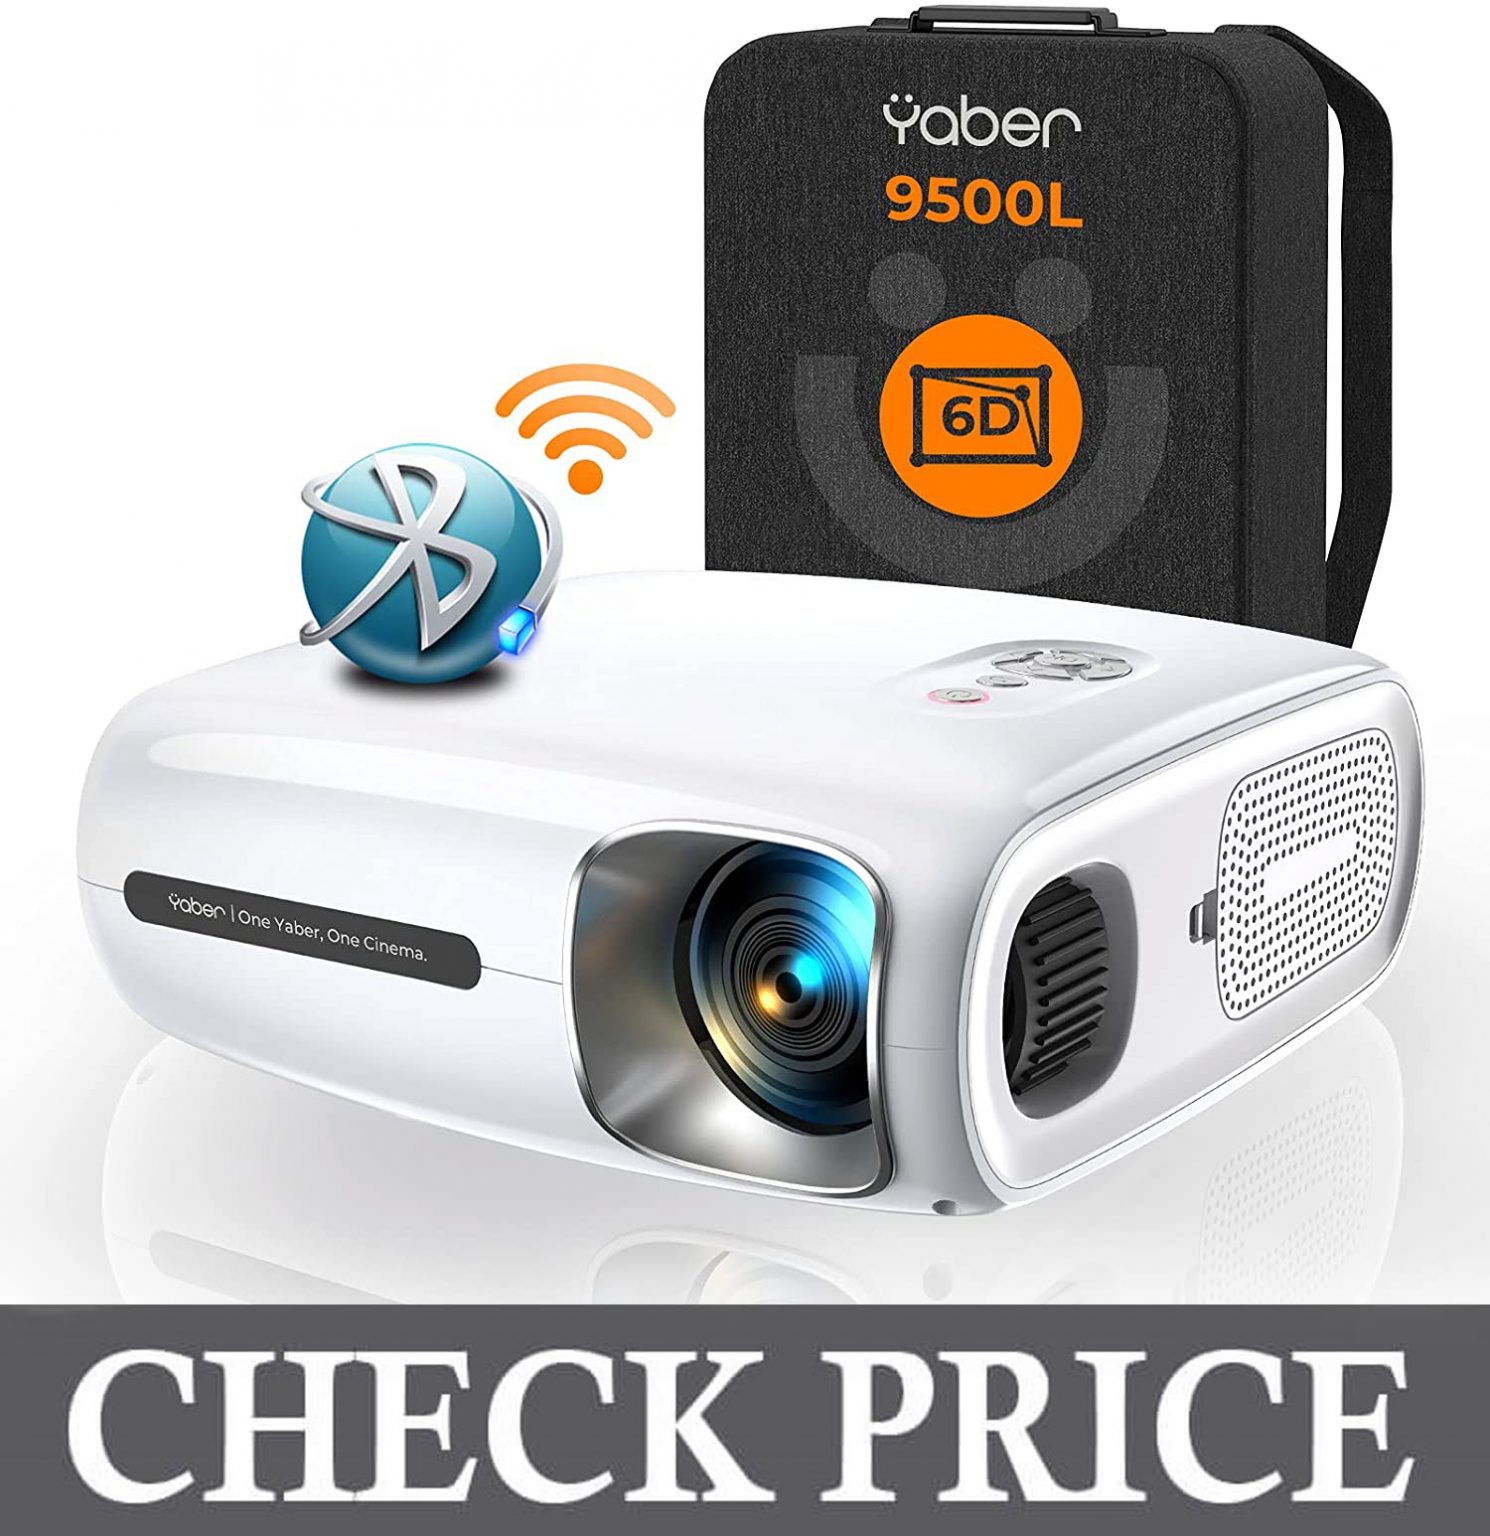 Top 6 Yaber Projectors - 2022 Reviews & Buyer's Guide